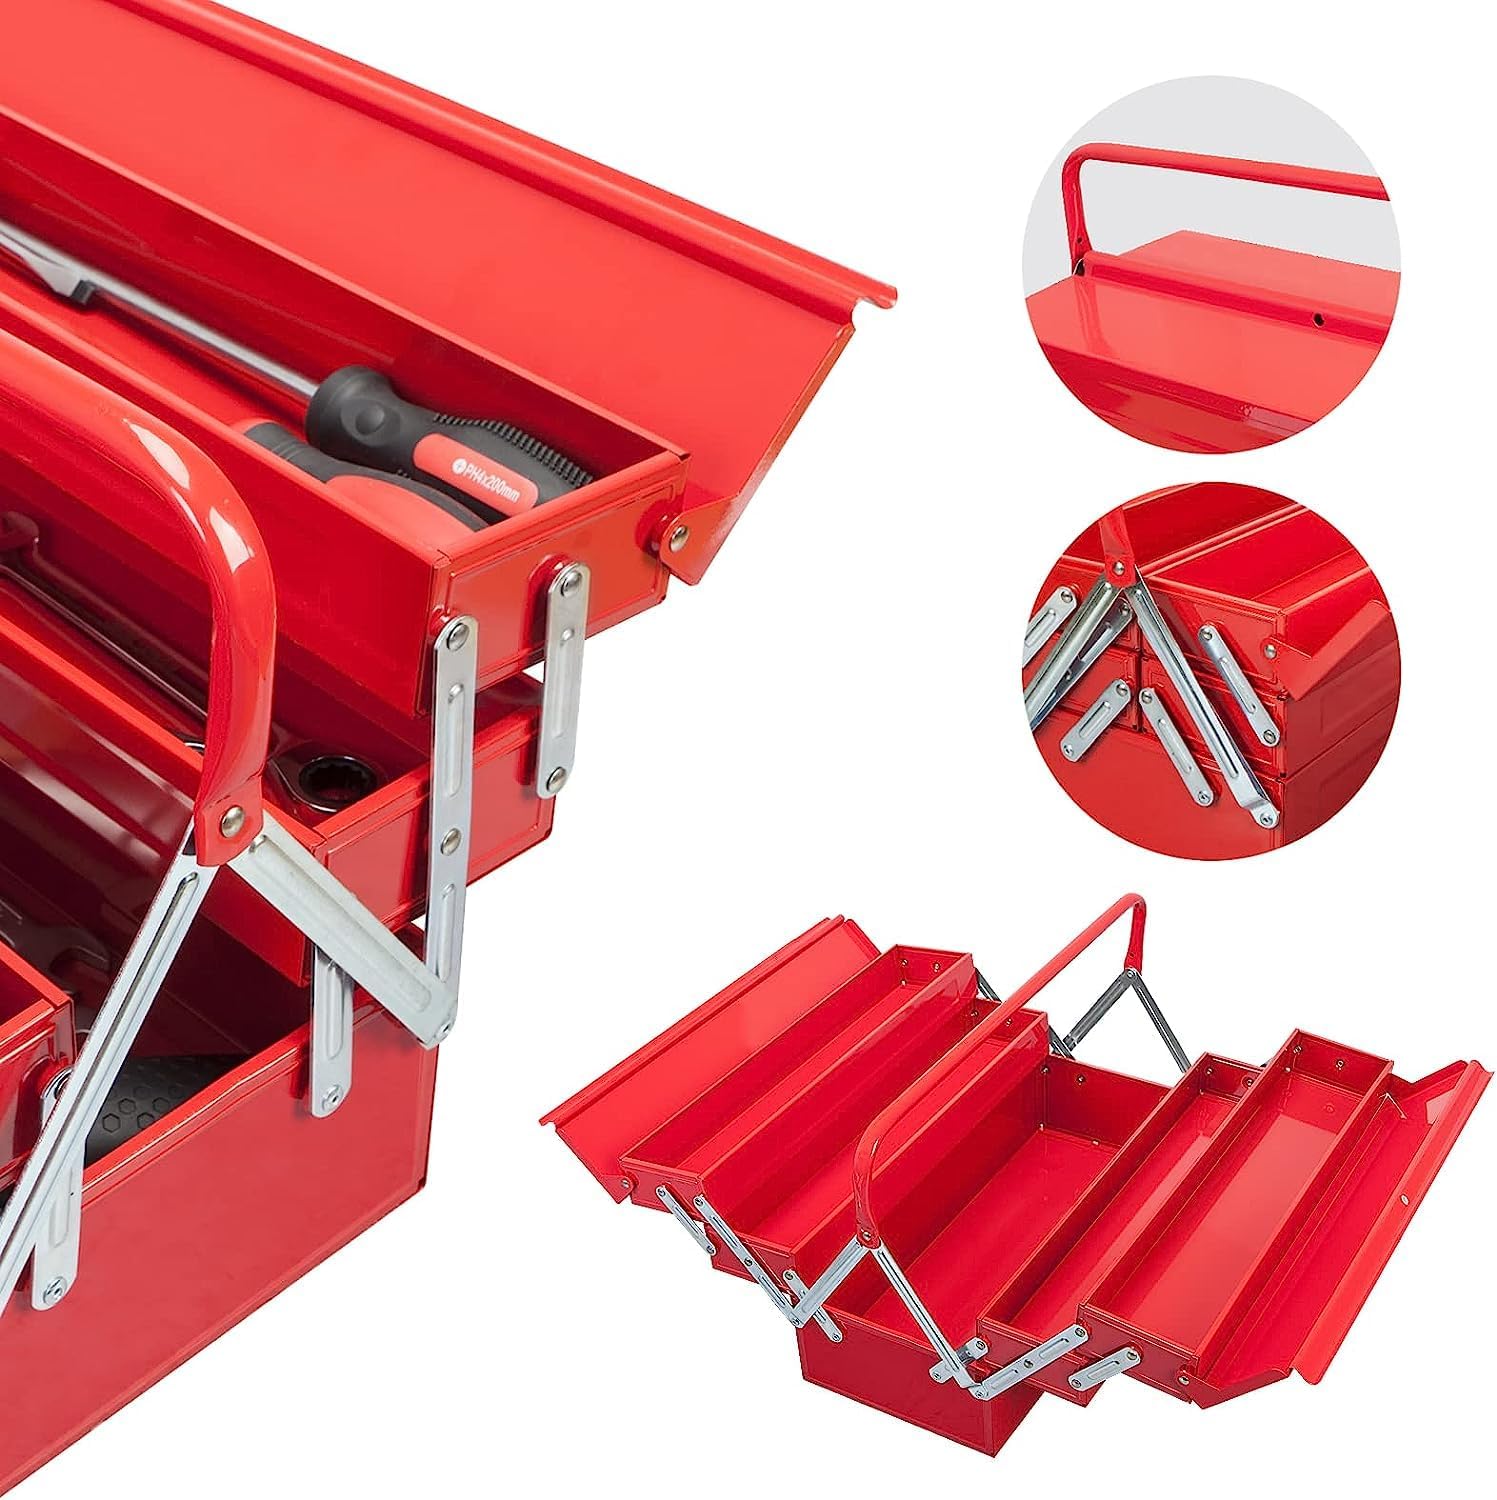 https://bigbigmart.com/wp-content/uploads/2023/10/BIG-RED-18-Tool-BoxPortable-Steel-Metal-Locking-Toolbox-Organizer-with-5-Cantilever-Tool-TraysANTBC-128RRed5.jpg